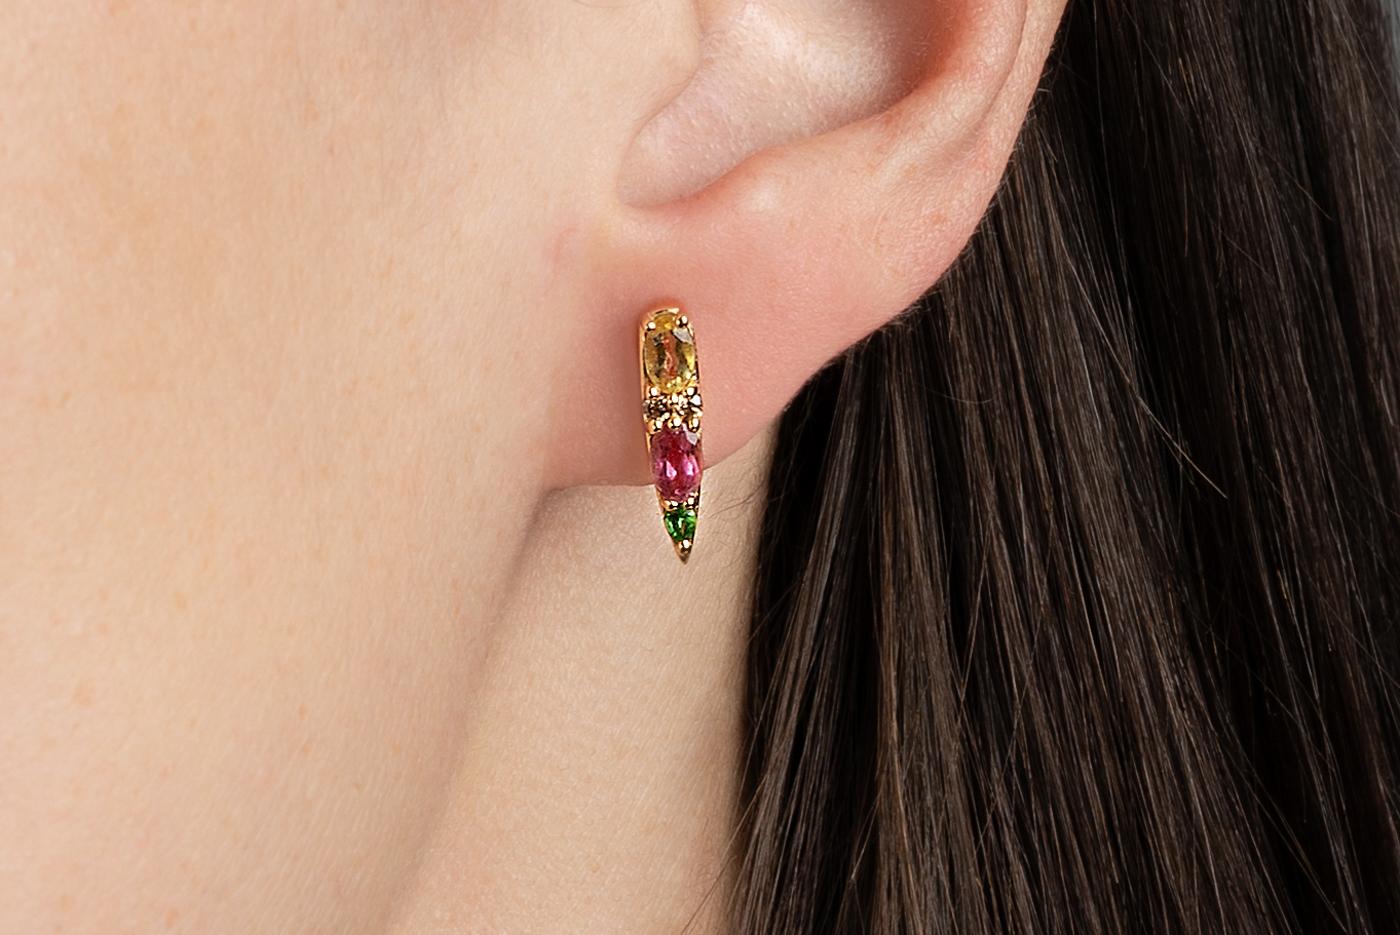 Nikos Koulis Spectrum Collection K18 Yellow Gold Stud Earrings with 0.49 cts Pink Tourmalines, 0.41 cts Yellow Beryls, 0.15 cts Tsavorites, 0.10 cts Brown Diamonds